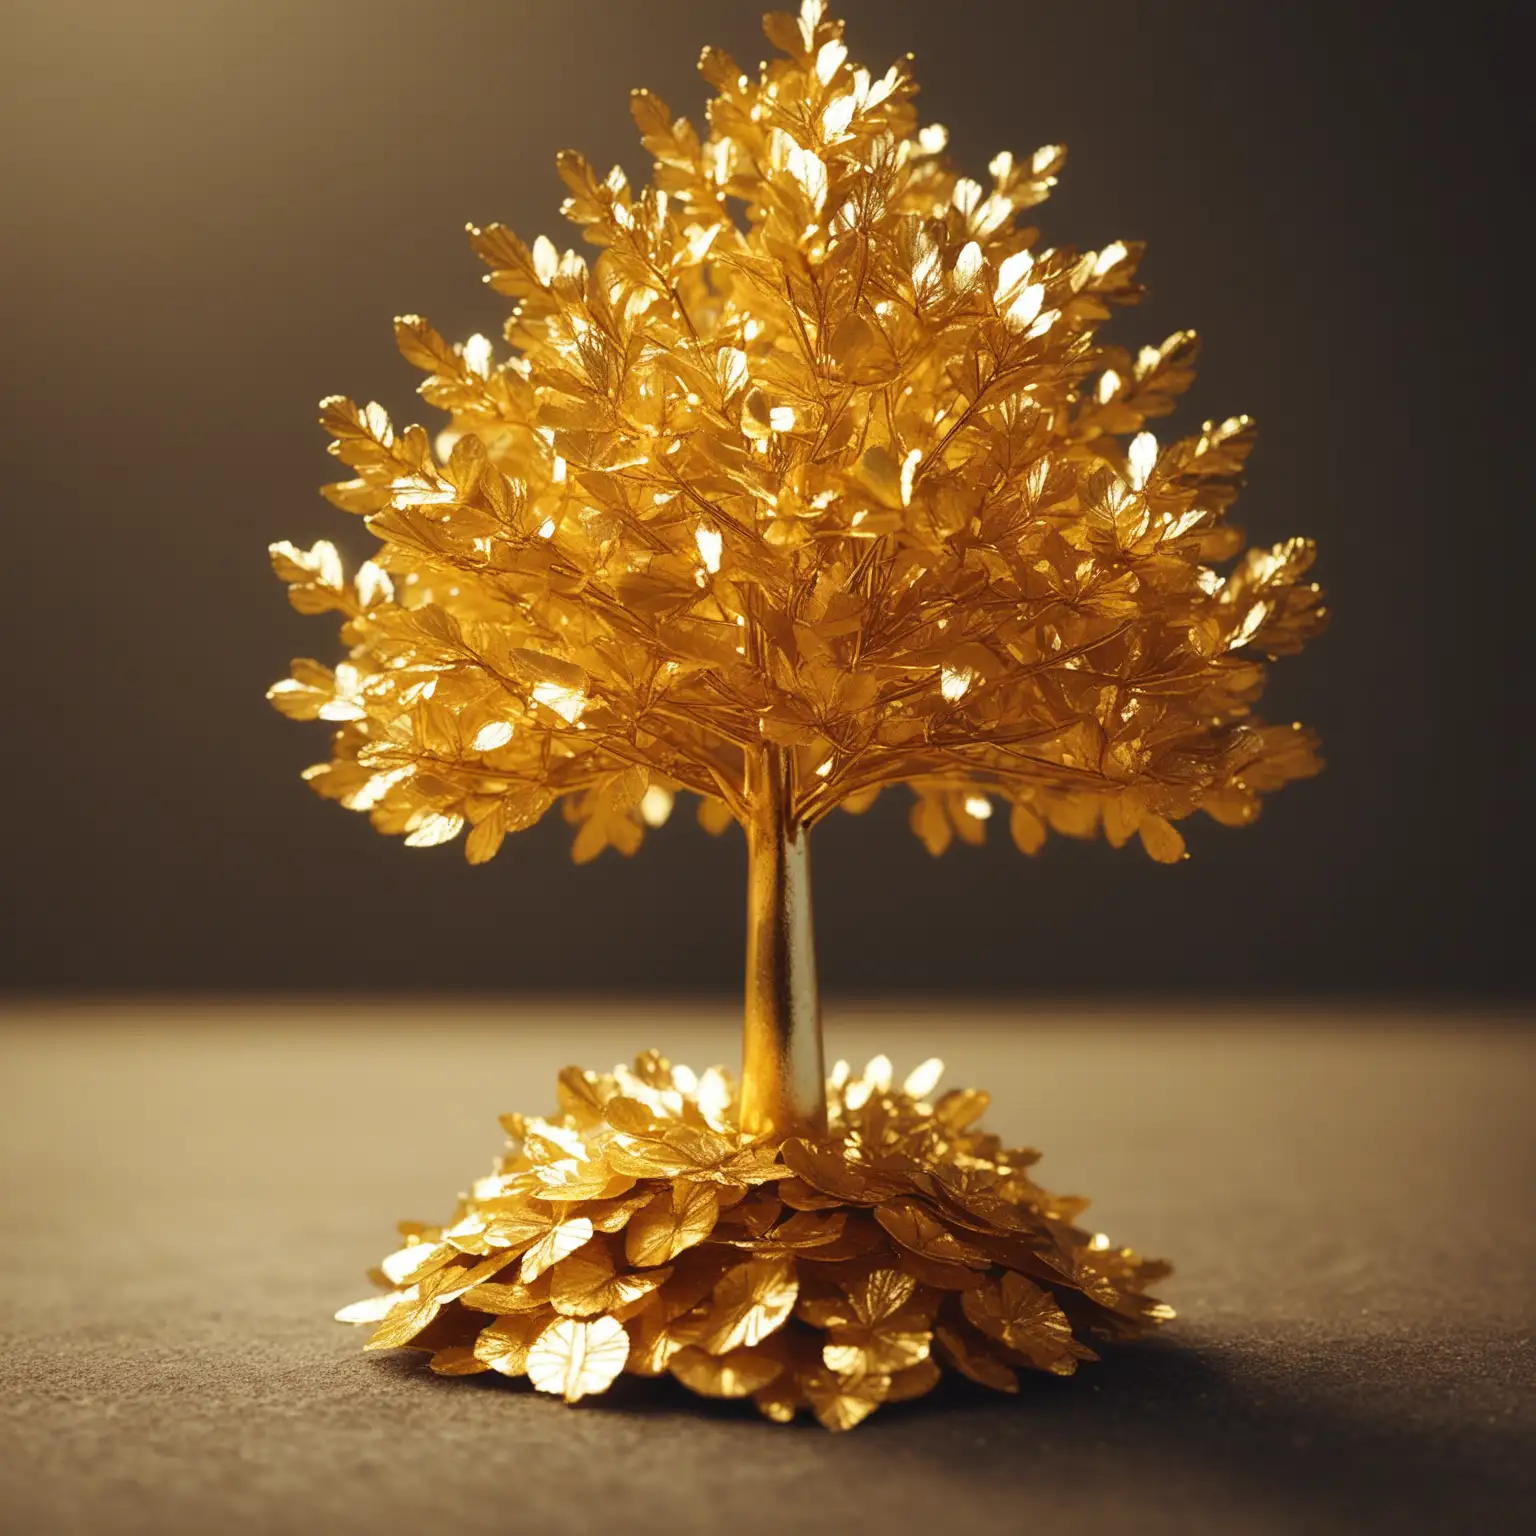 Golden Little Tree in Magical Forest Illuminated by Sunlight